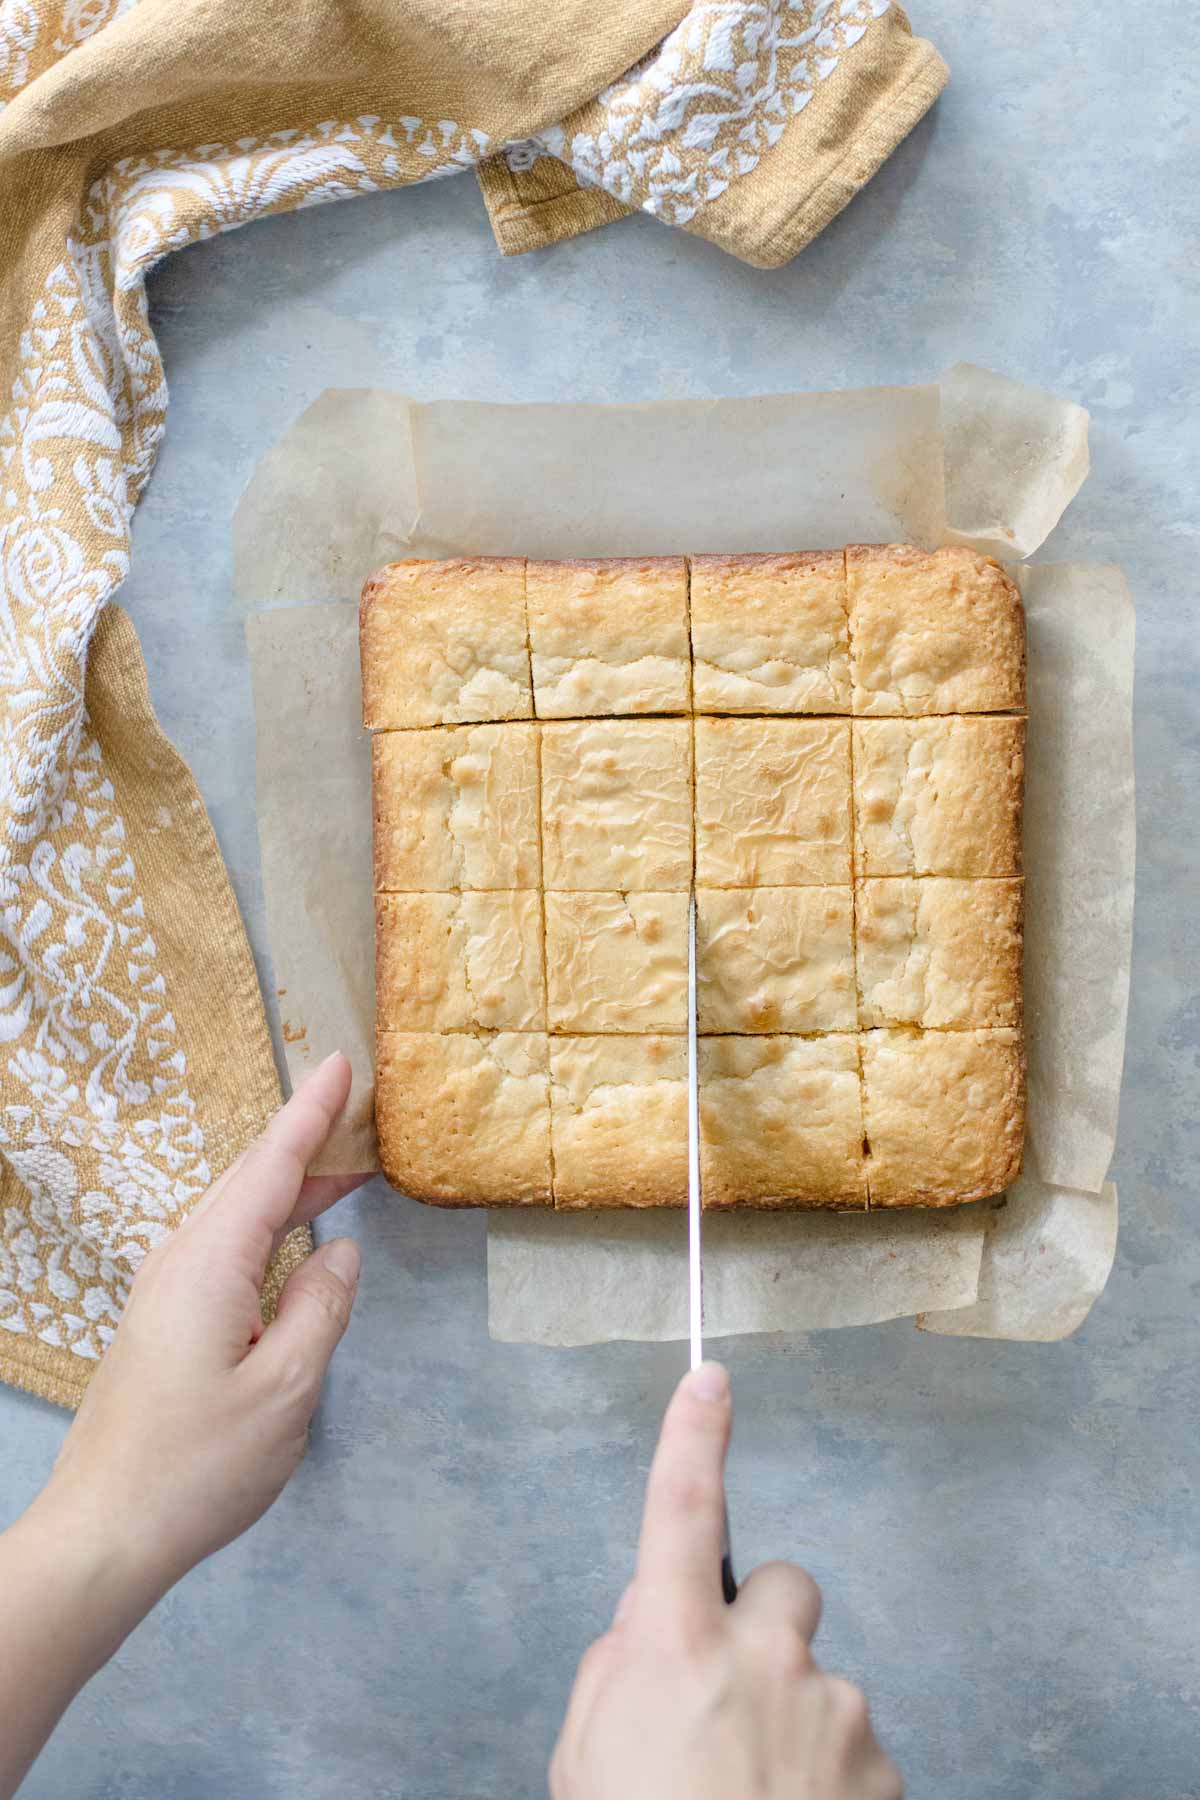 Cutting the blondies into squares with a knife.